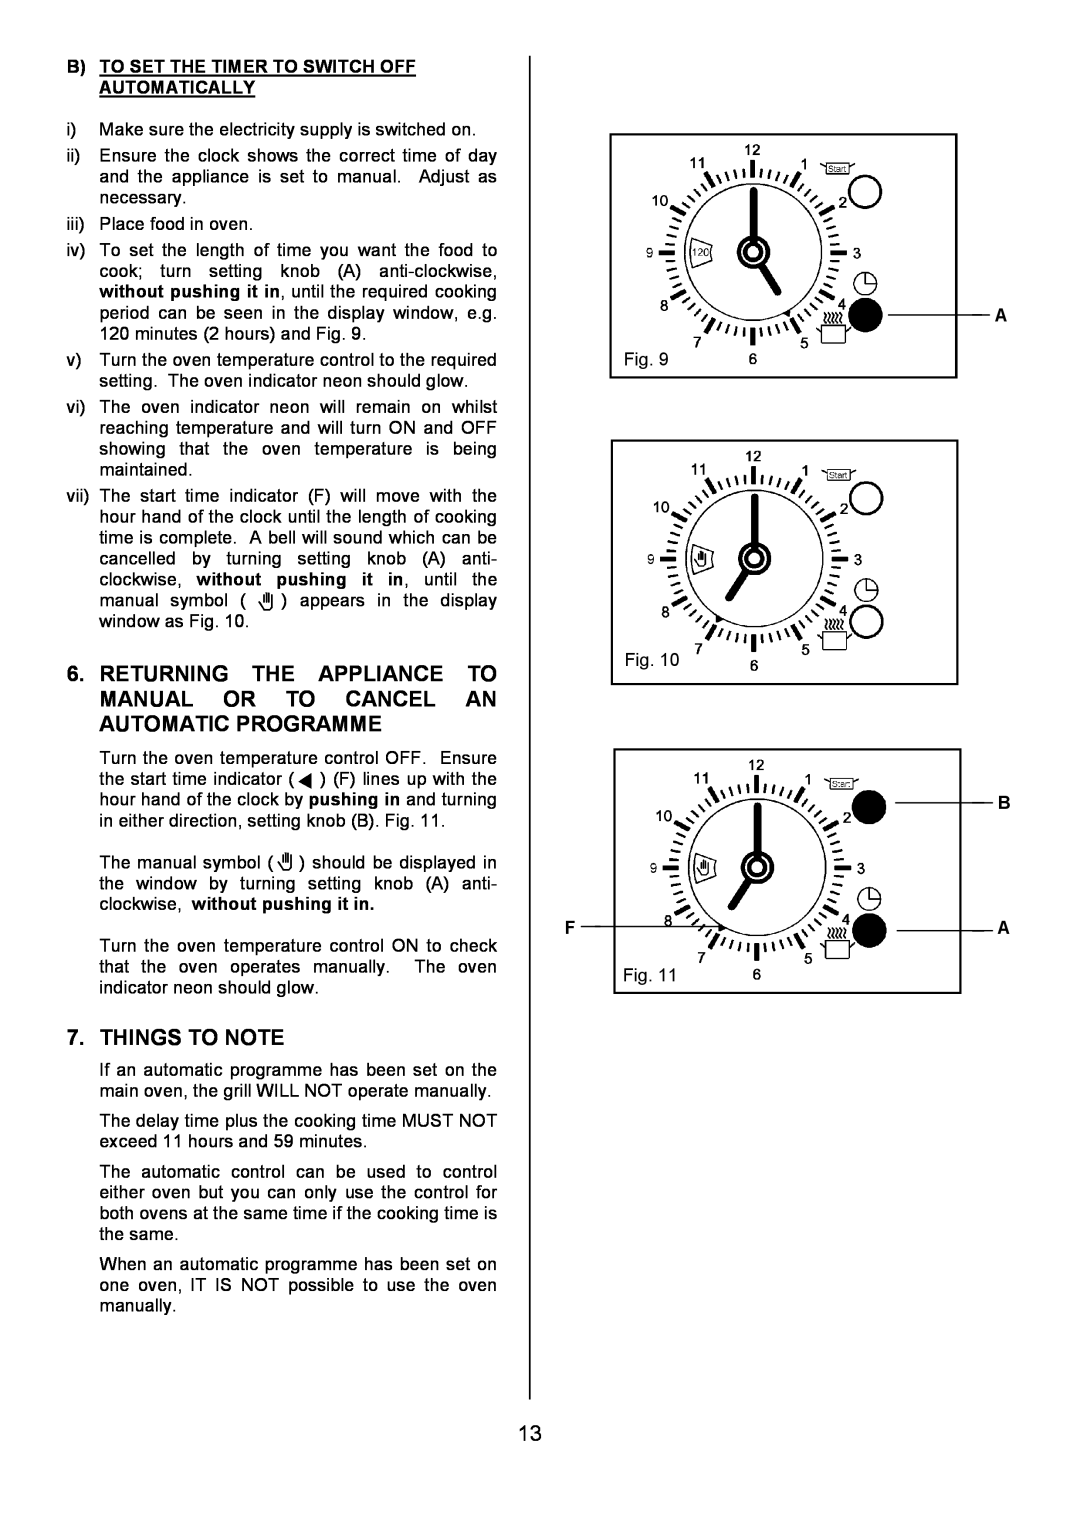 Tricity Bendix SB432 installation instructions Things To Note, B To Set The Timer To Switch Off Automatically, A B A 